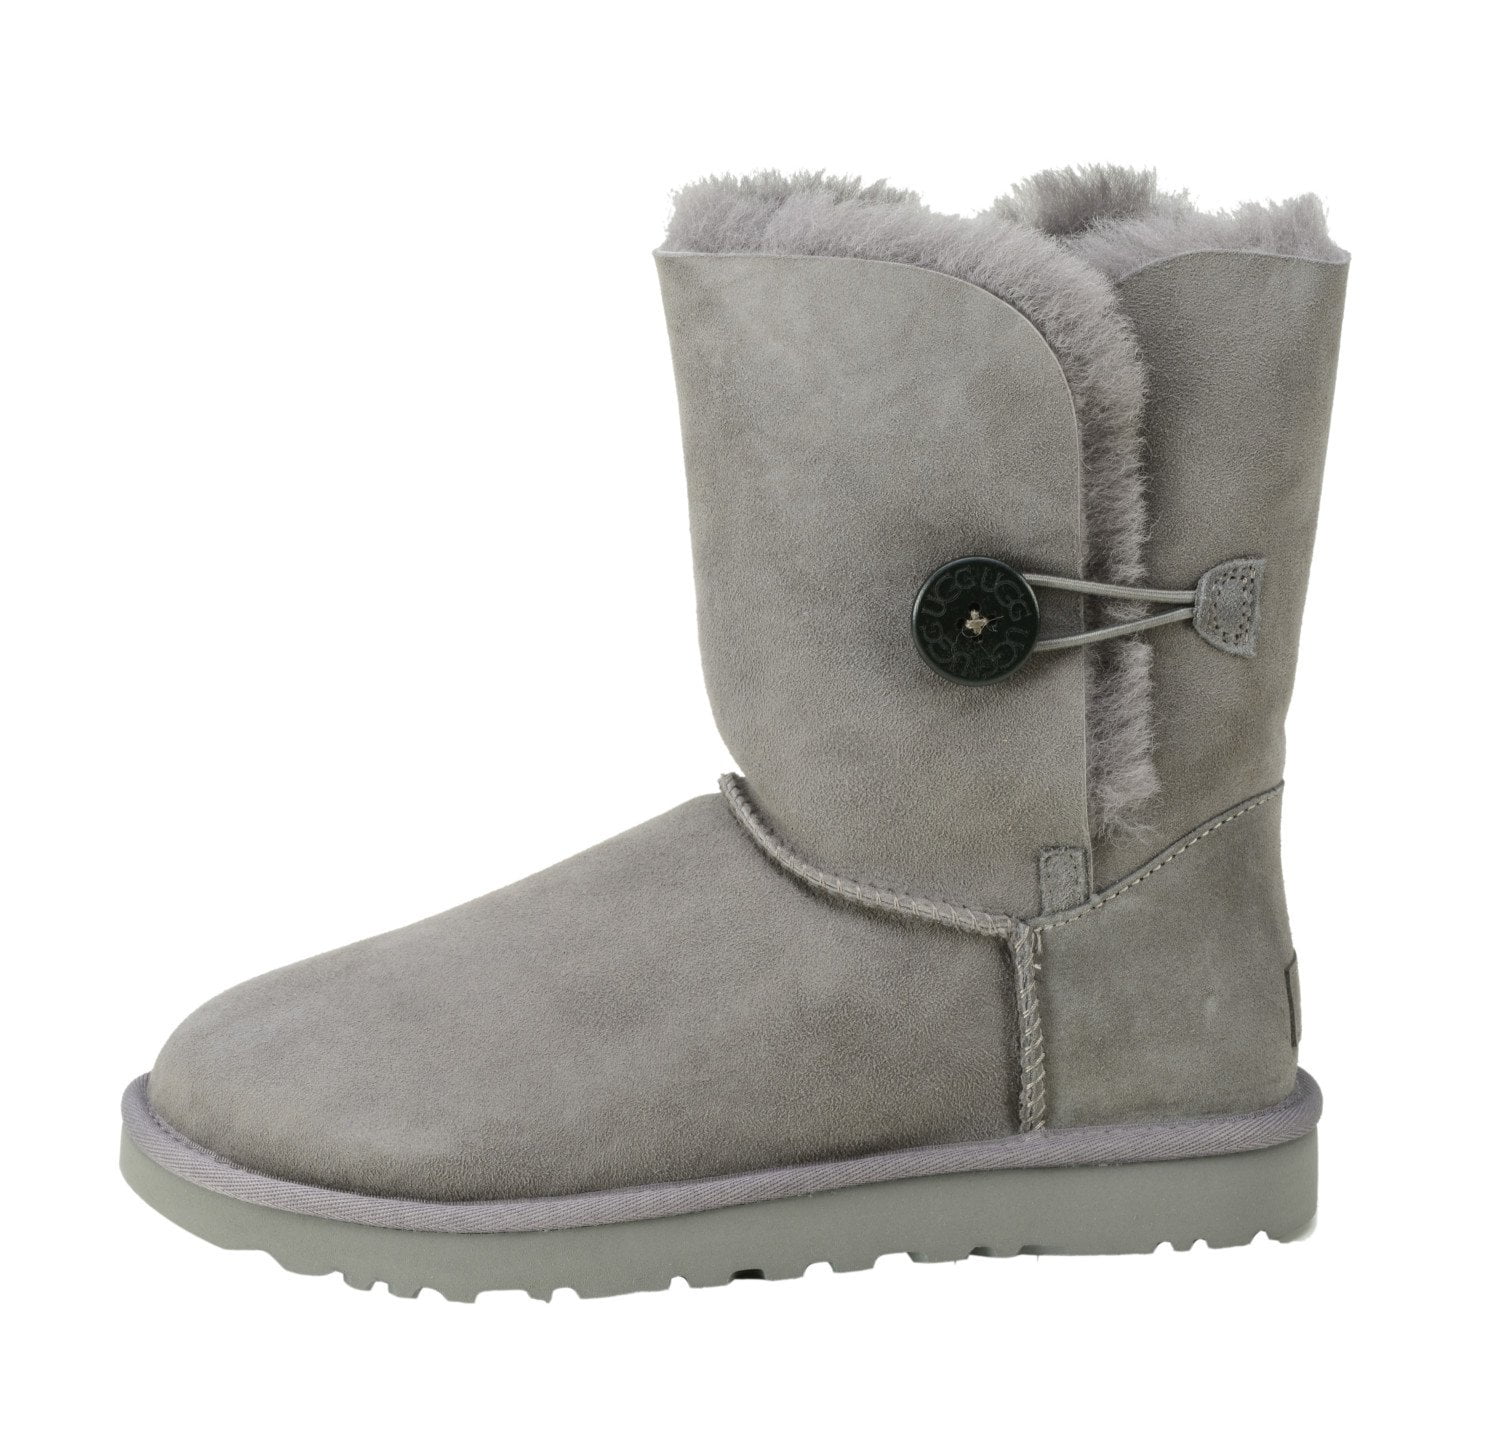 gray uggs with buttons